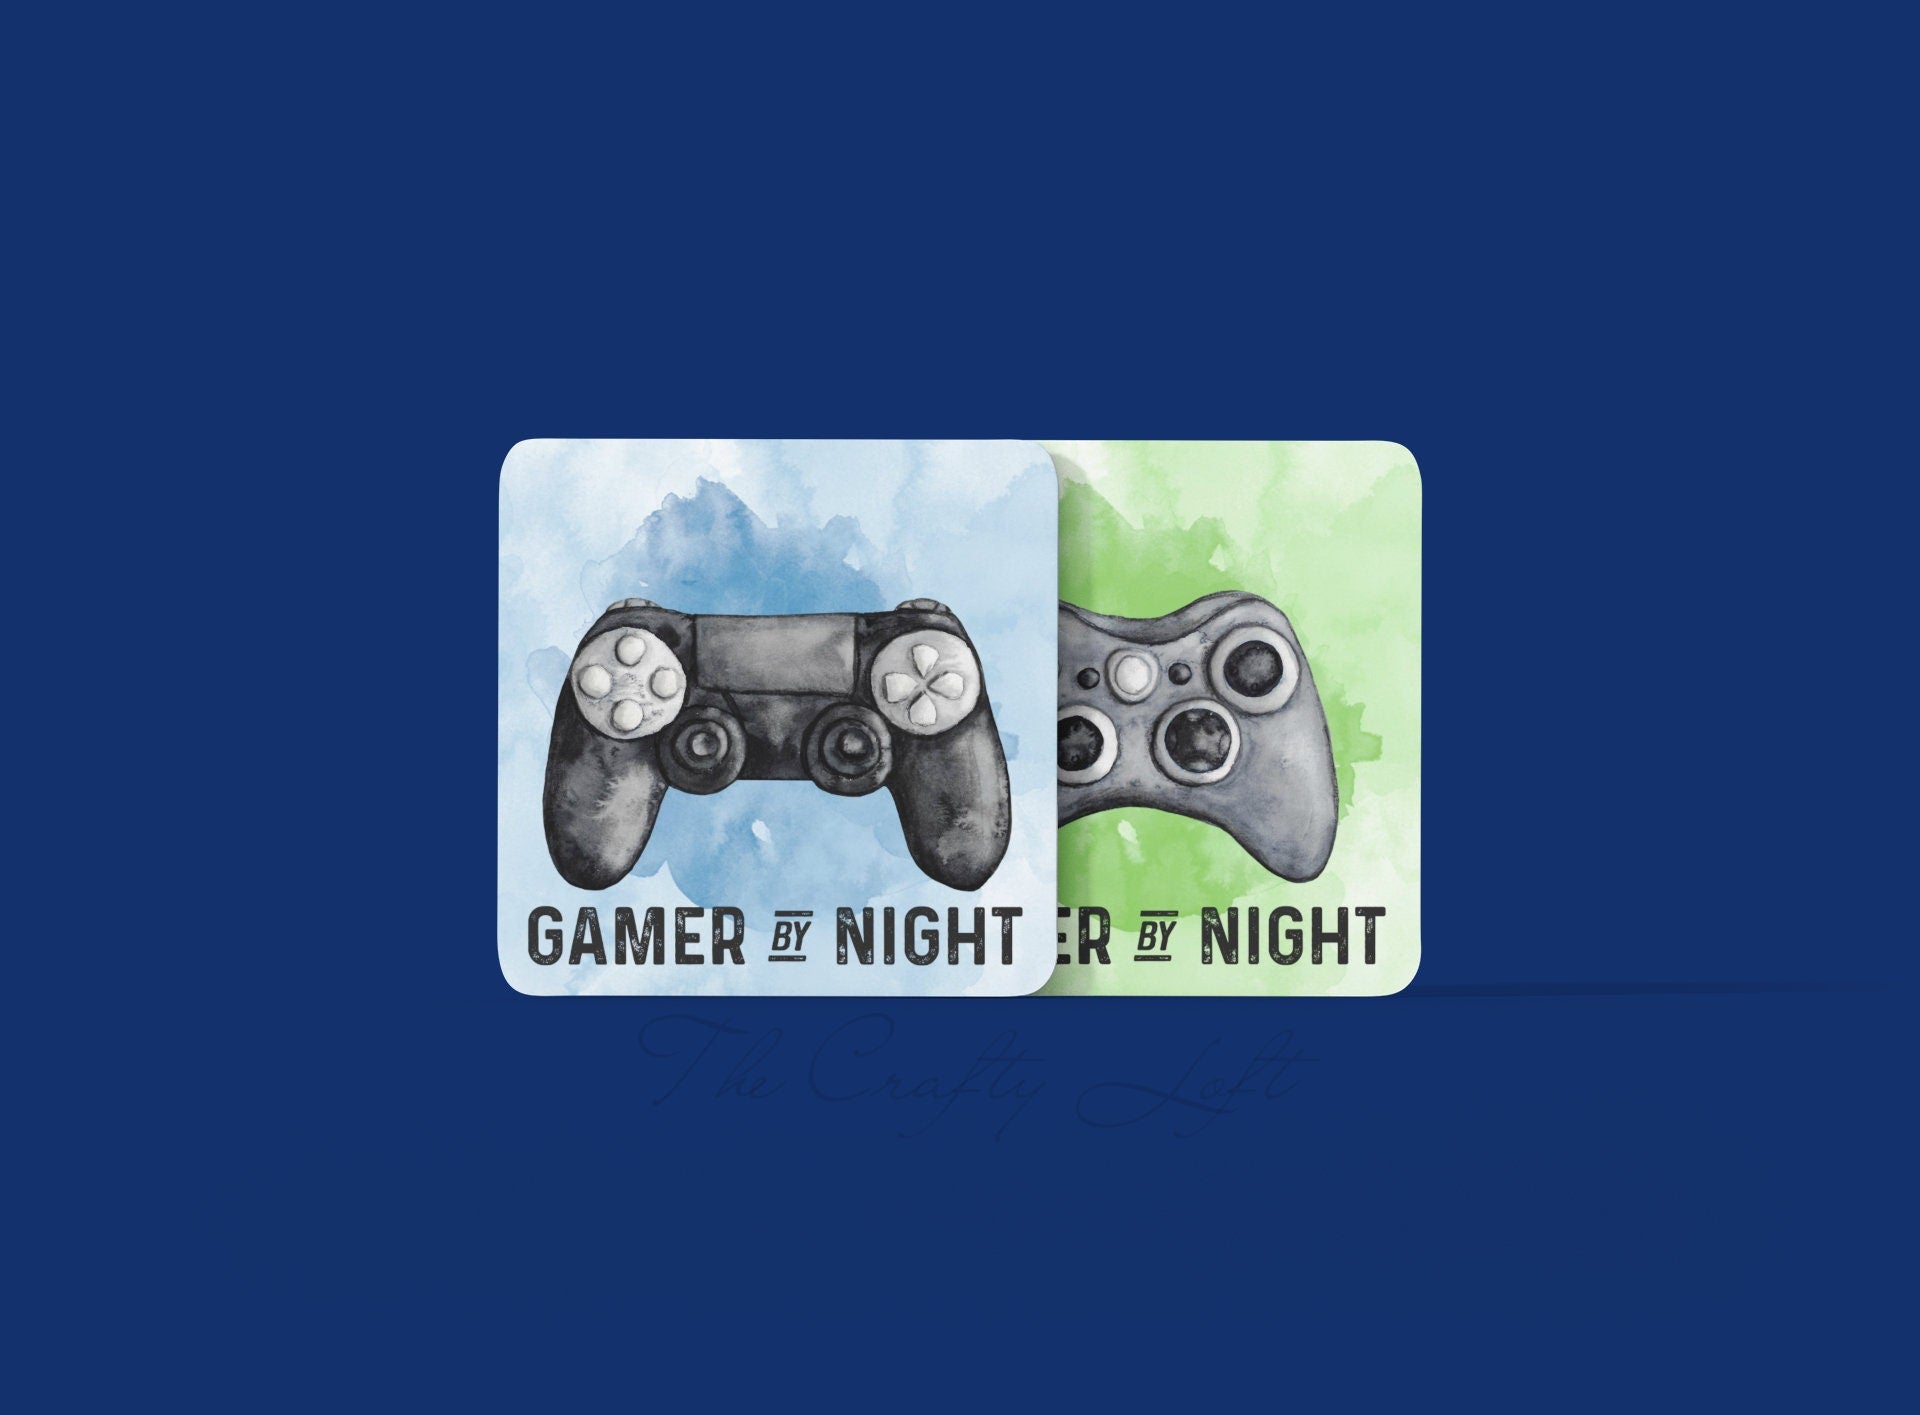 Hardboard coaster set featuring a gaming design with text that reads 'dad by day, gamer by night' in blue or green